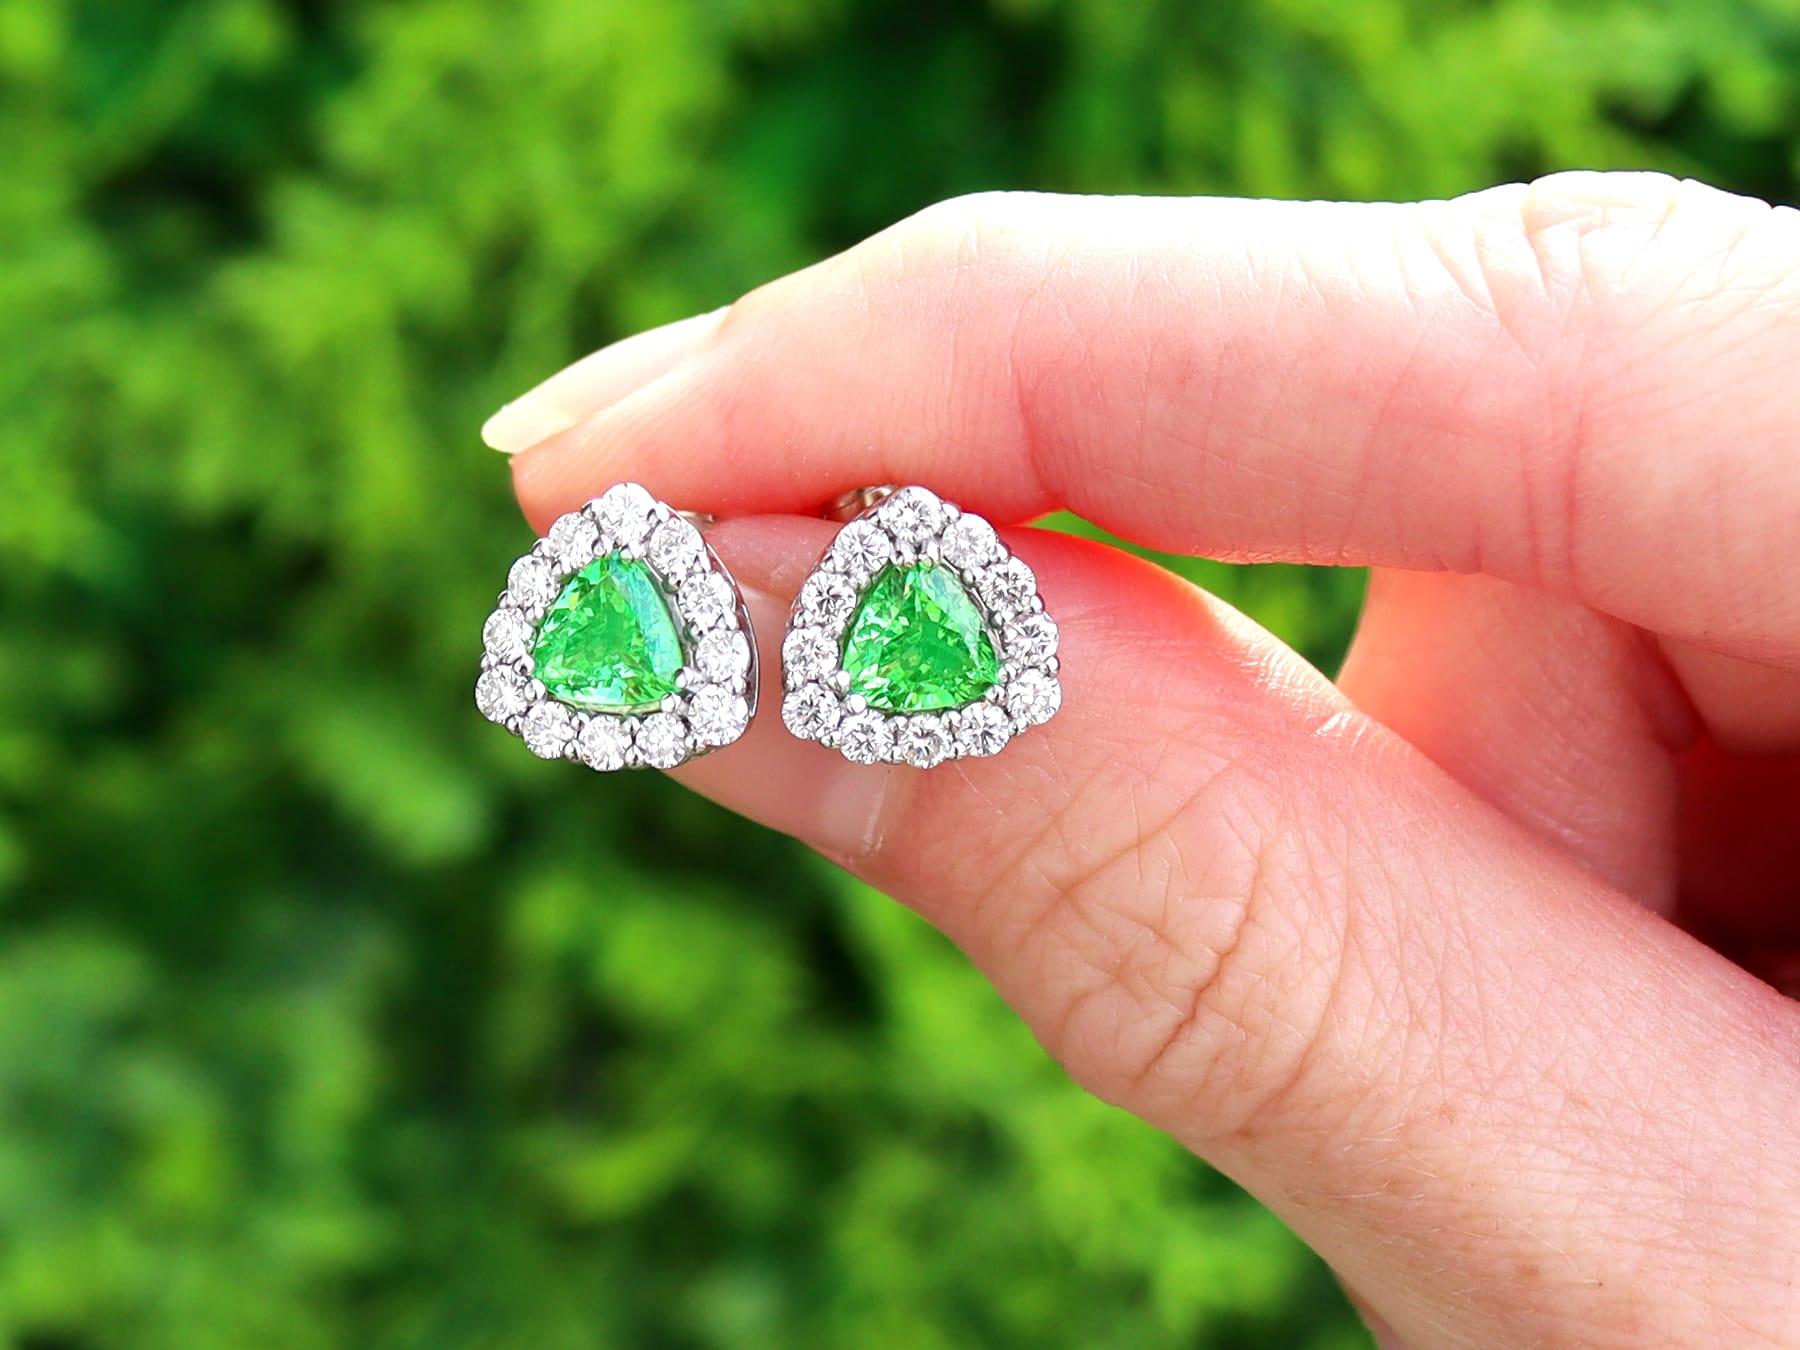 A fine and impressive pair of vintage 2.10 carat hydrogrossular/green garnet and 0.88 carat diamond, 18 karat white gold earrings; part of our diverse vintage jewellery collections

These fine and impressive vintage earrings have been crafted in 18k